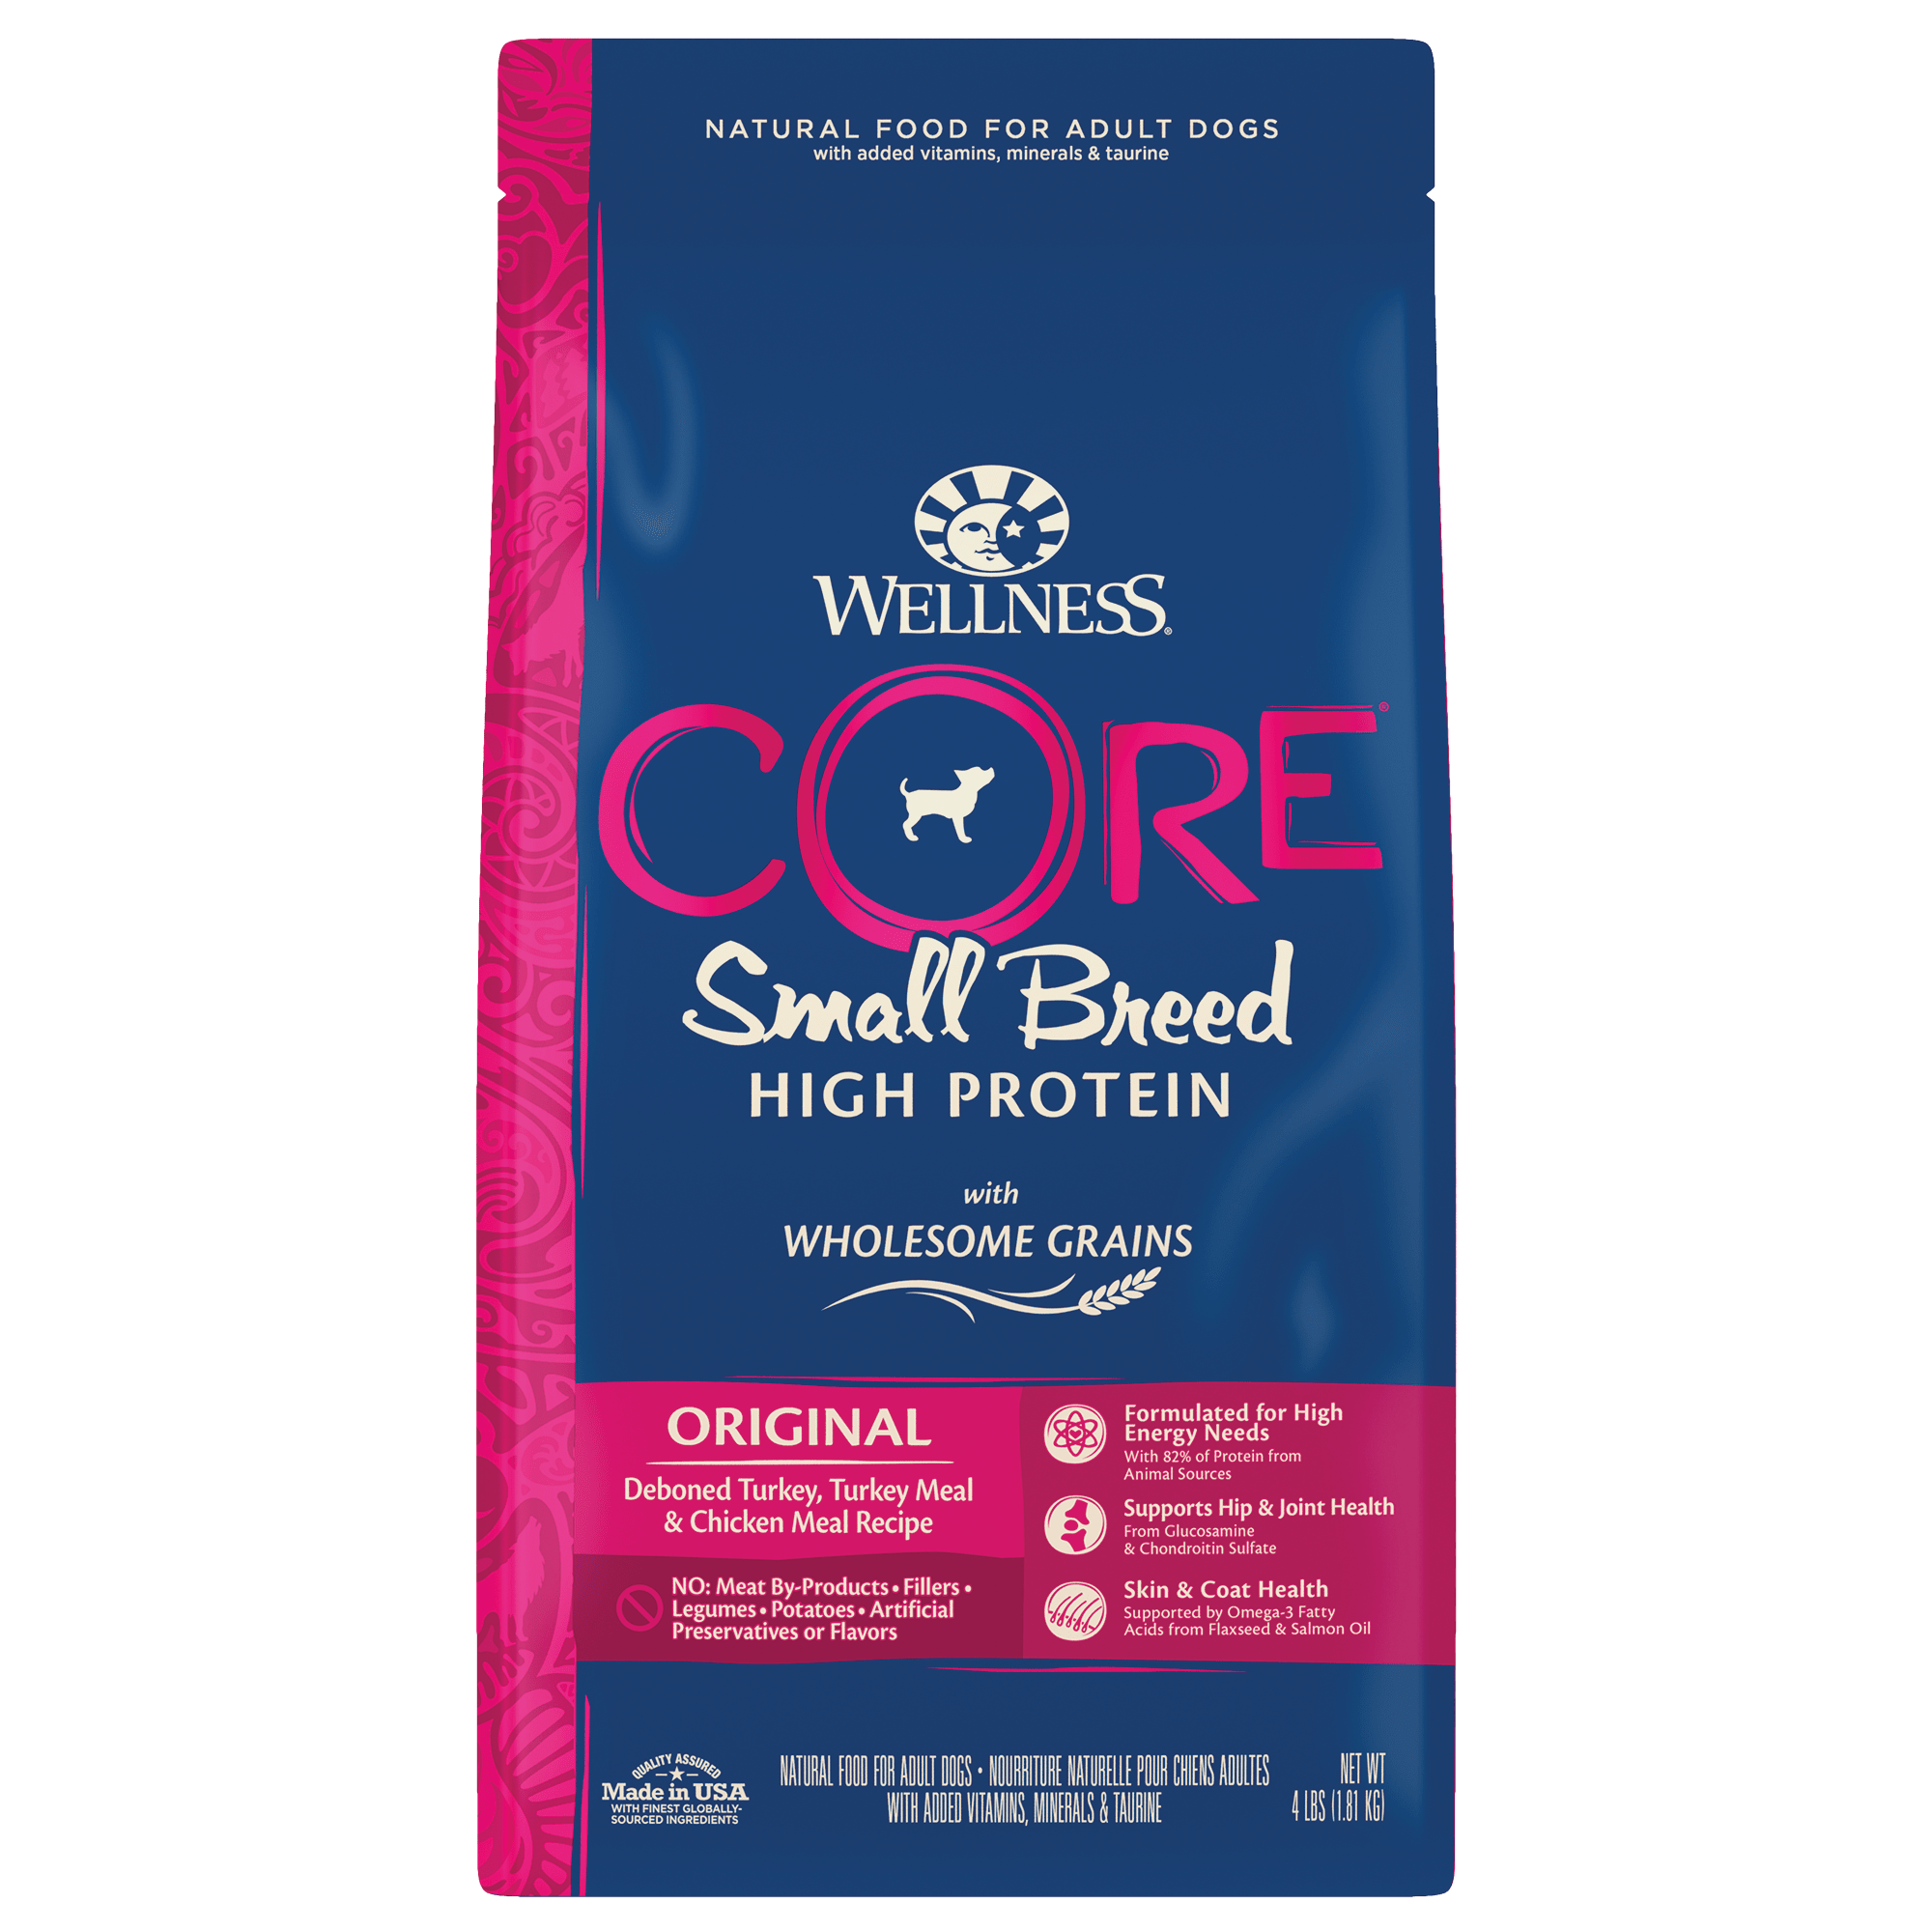 Wellness CORE Wholesome Grains Original Small Breed Turkey, Turkey Meal & Chicken Meal Recipe Dry Dog Food